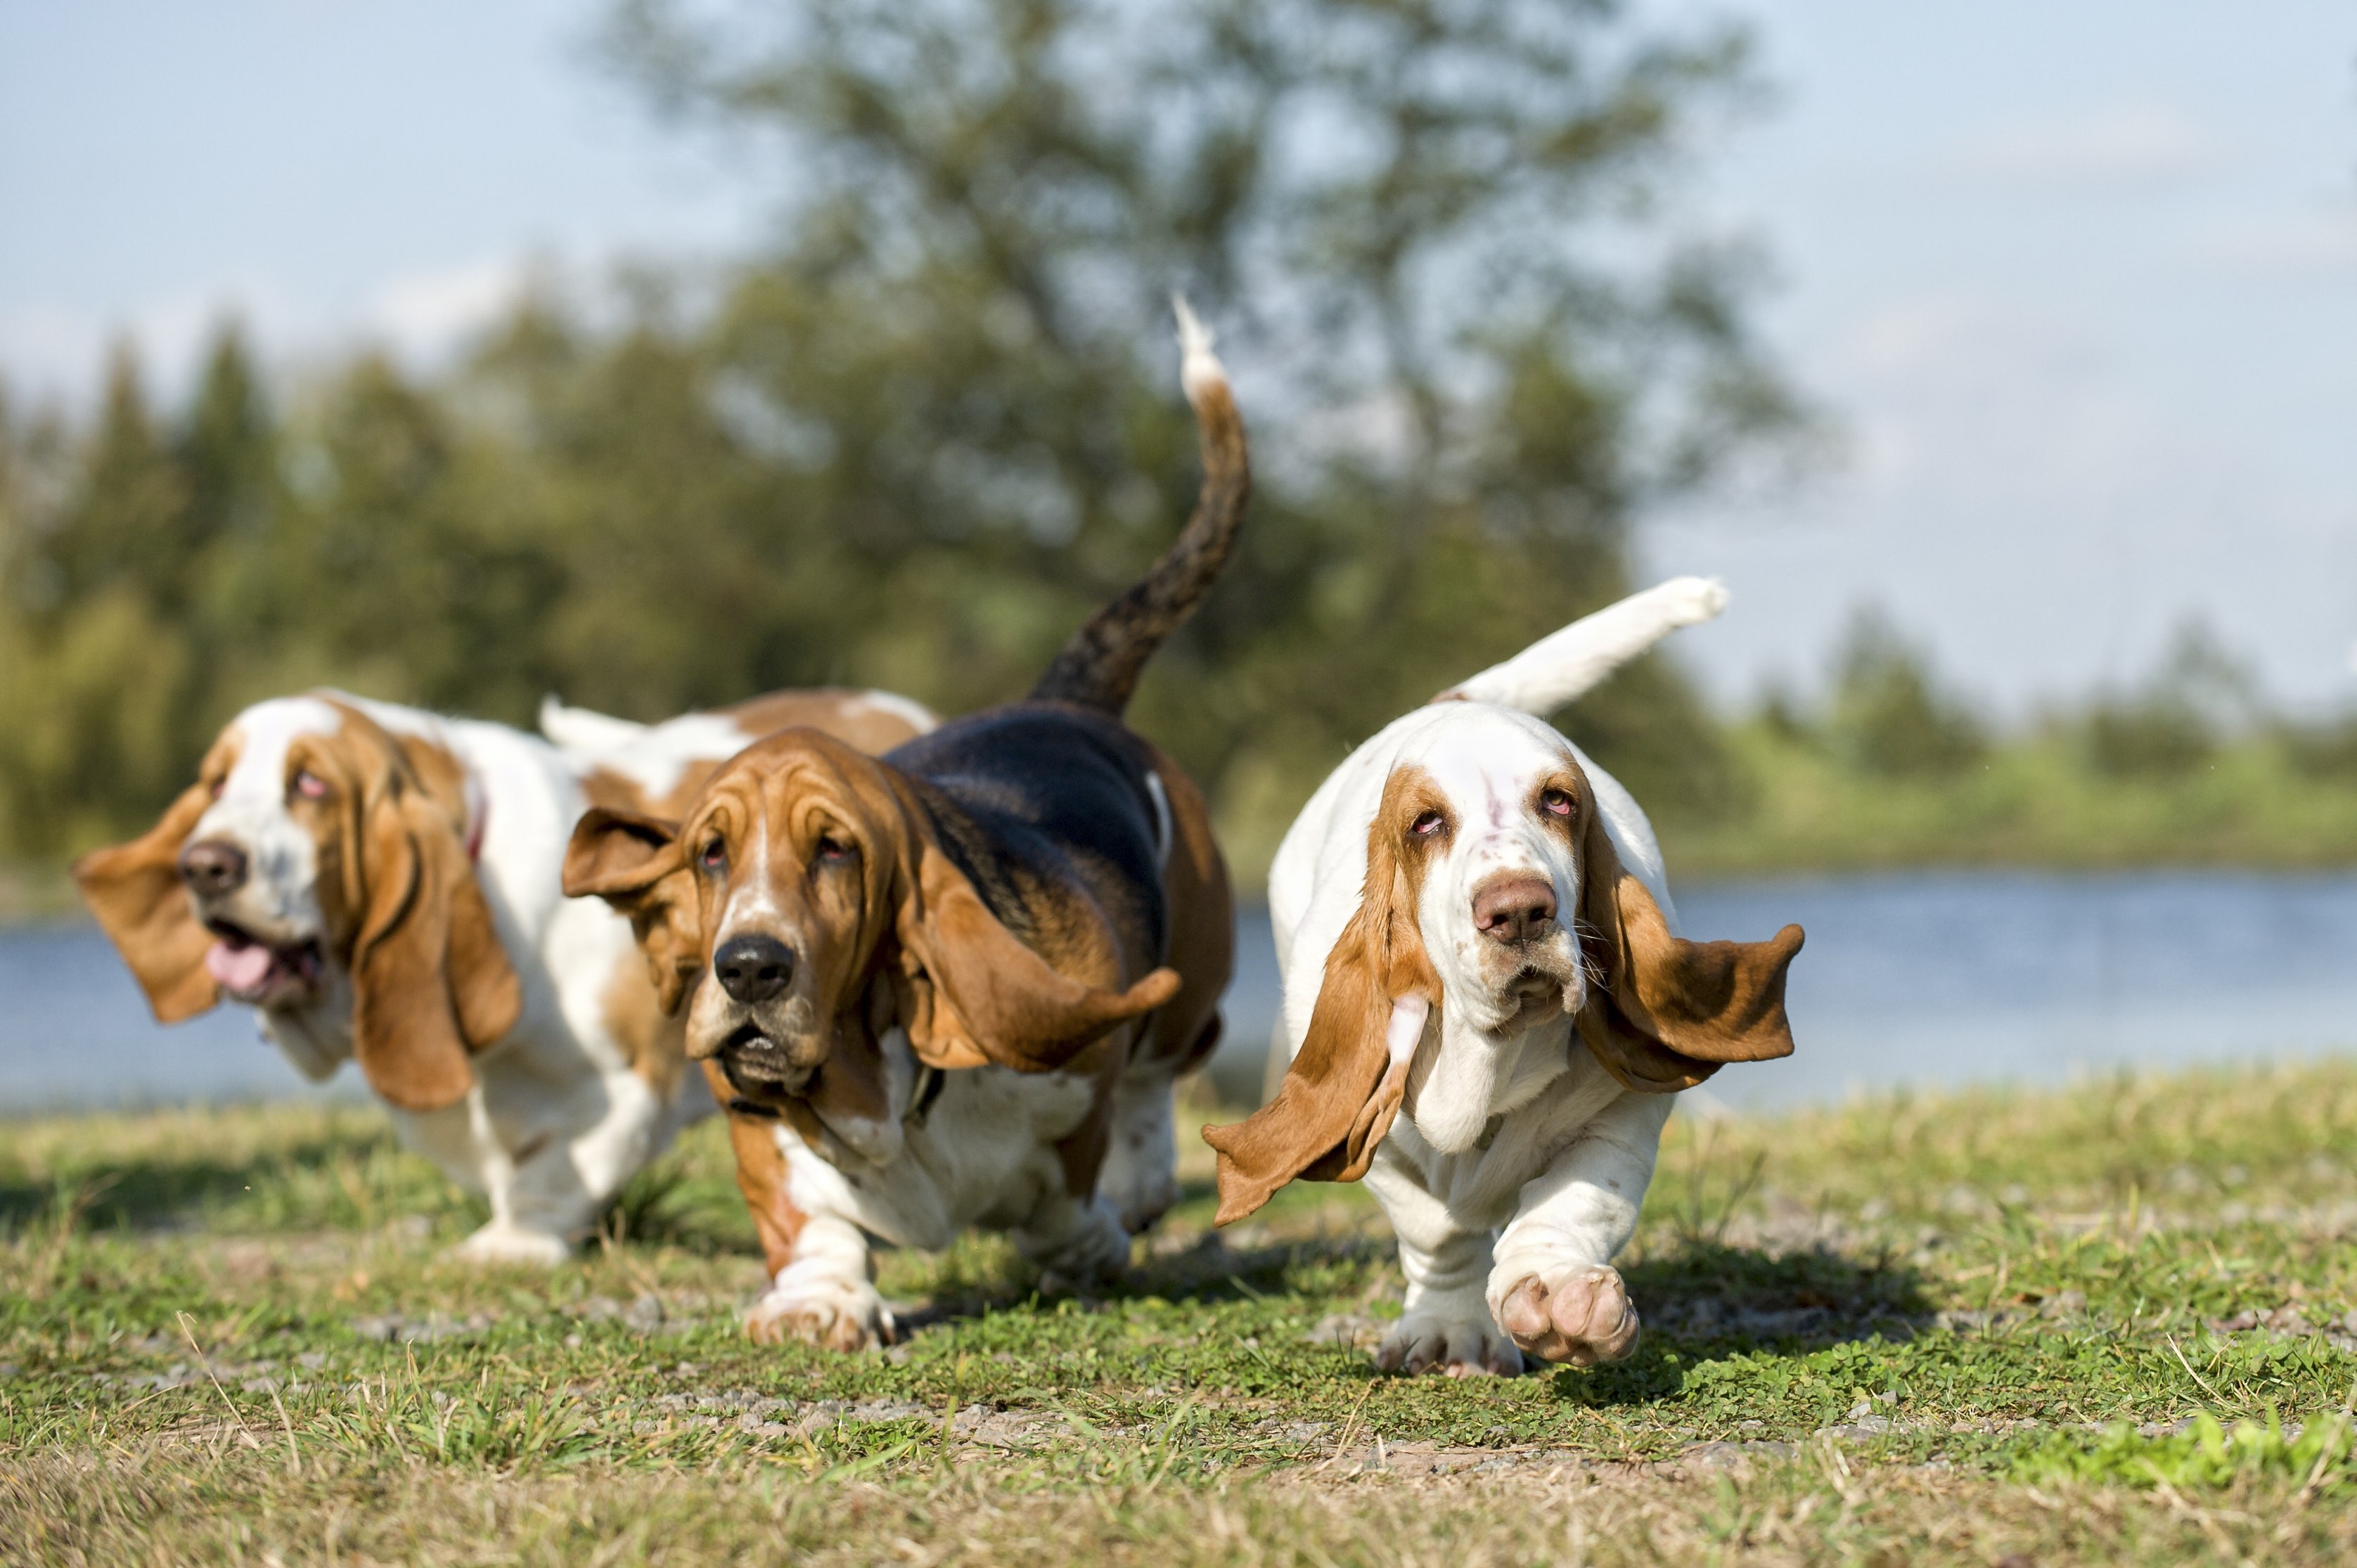 group of basset hounds running across a yard to the camera